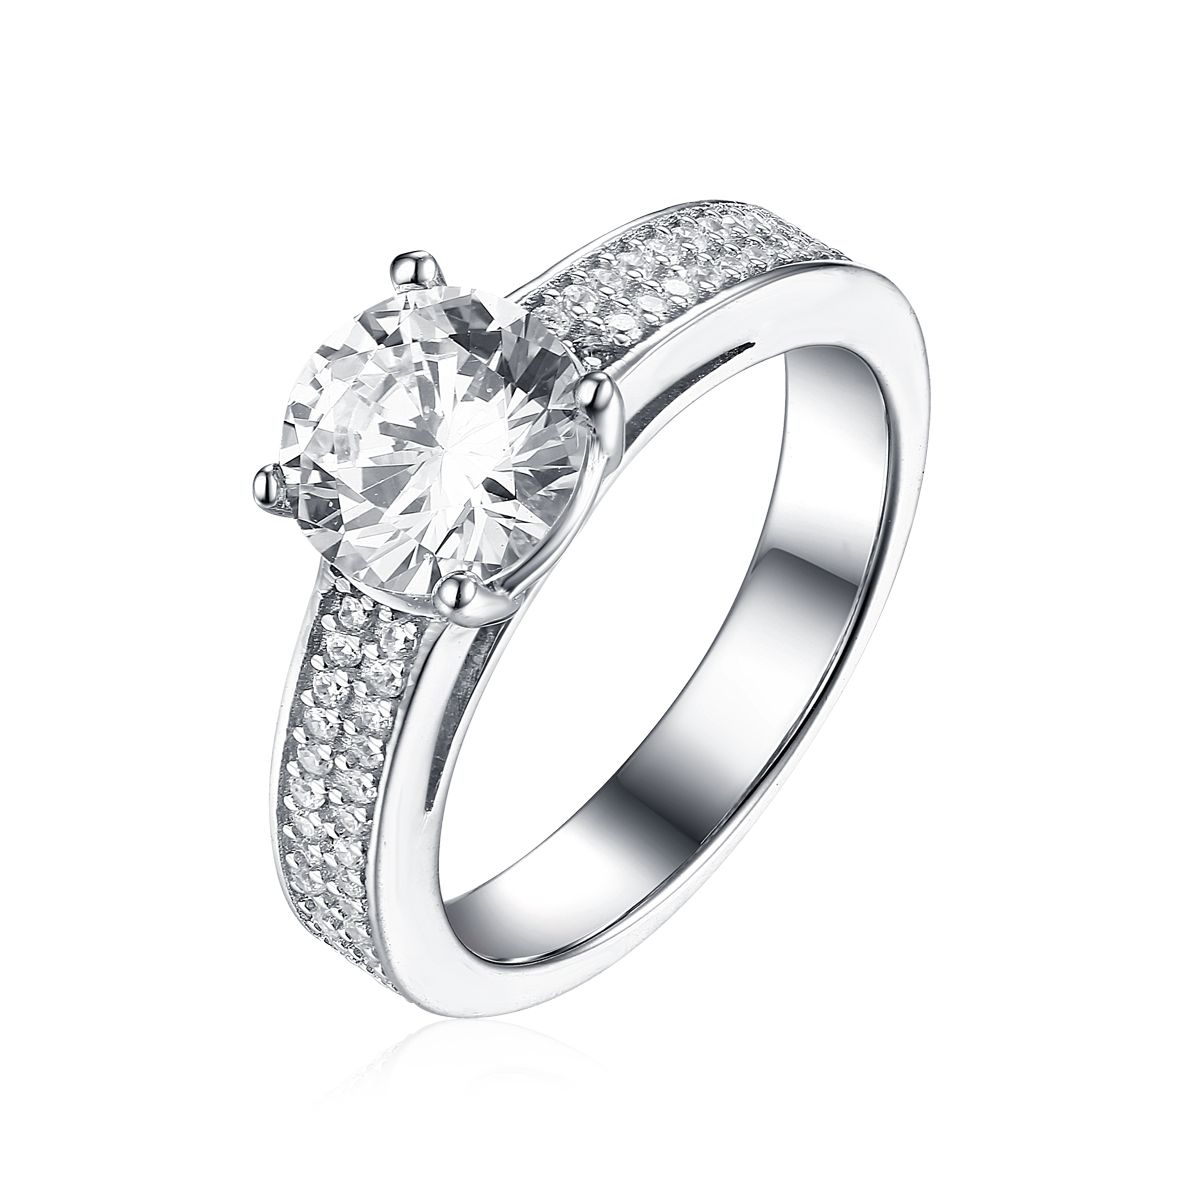 Sterling Silver Solitaire Claw Set Engagement Wedding Ring SR00028 ...